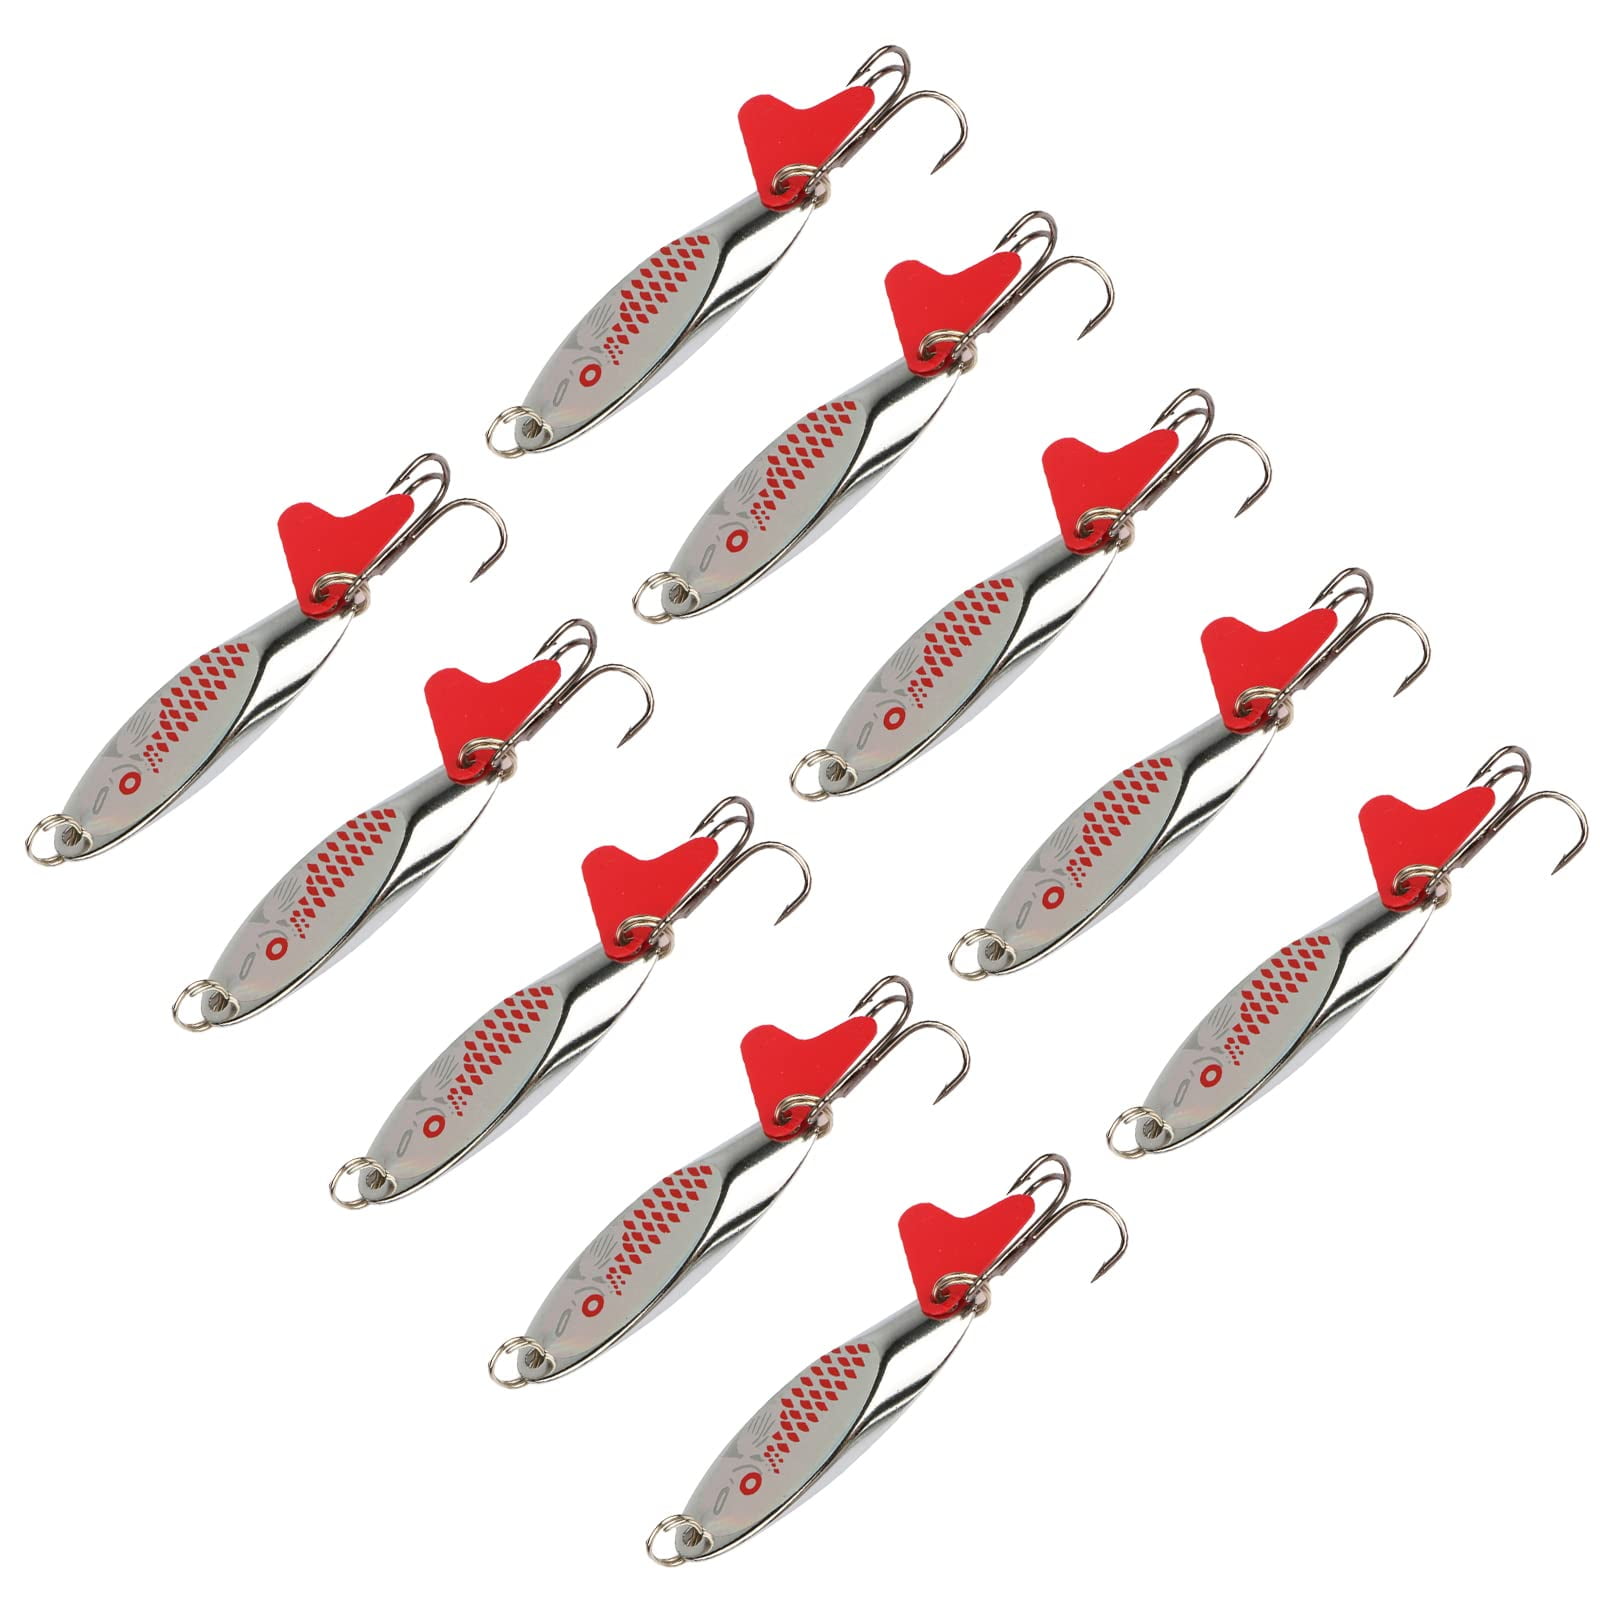 Goture Fishing Spoons Lures,Metal Spoon Trout Lures,Long Distance Casting  Fishing Lures for Trout Bass Crappie Pike Saltwater and Freshwater Fishing